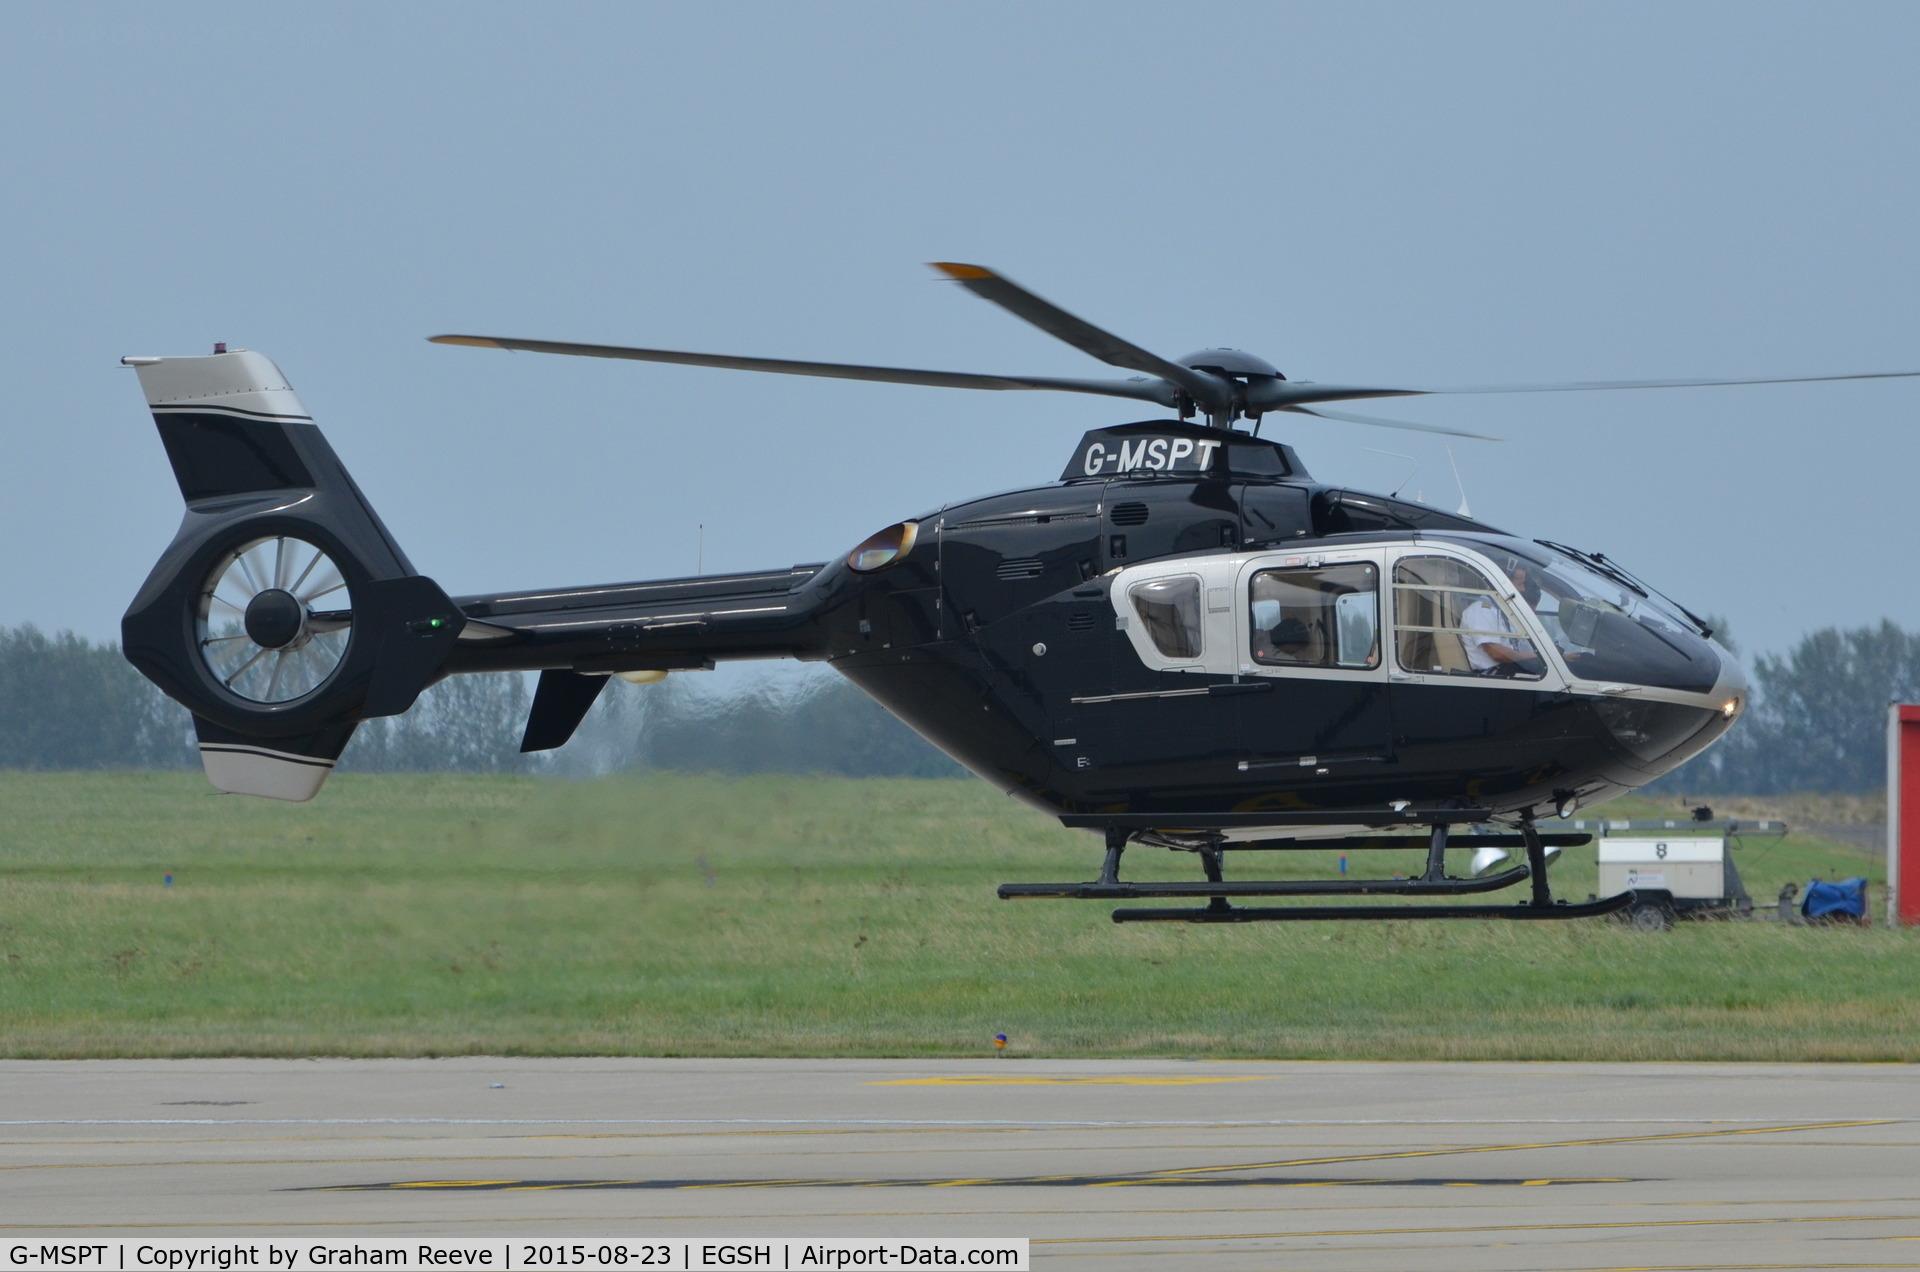 G-MSPT, 2004 Eurocopter EC-135T-2 C/N 0361, Departing from Norwich.